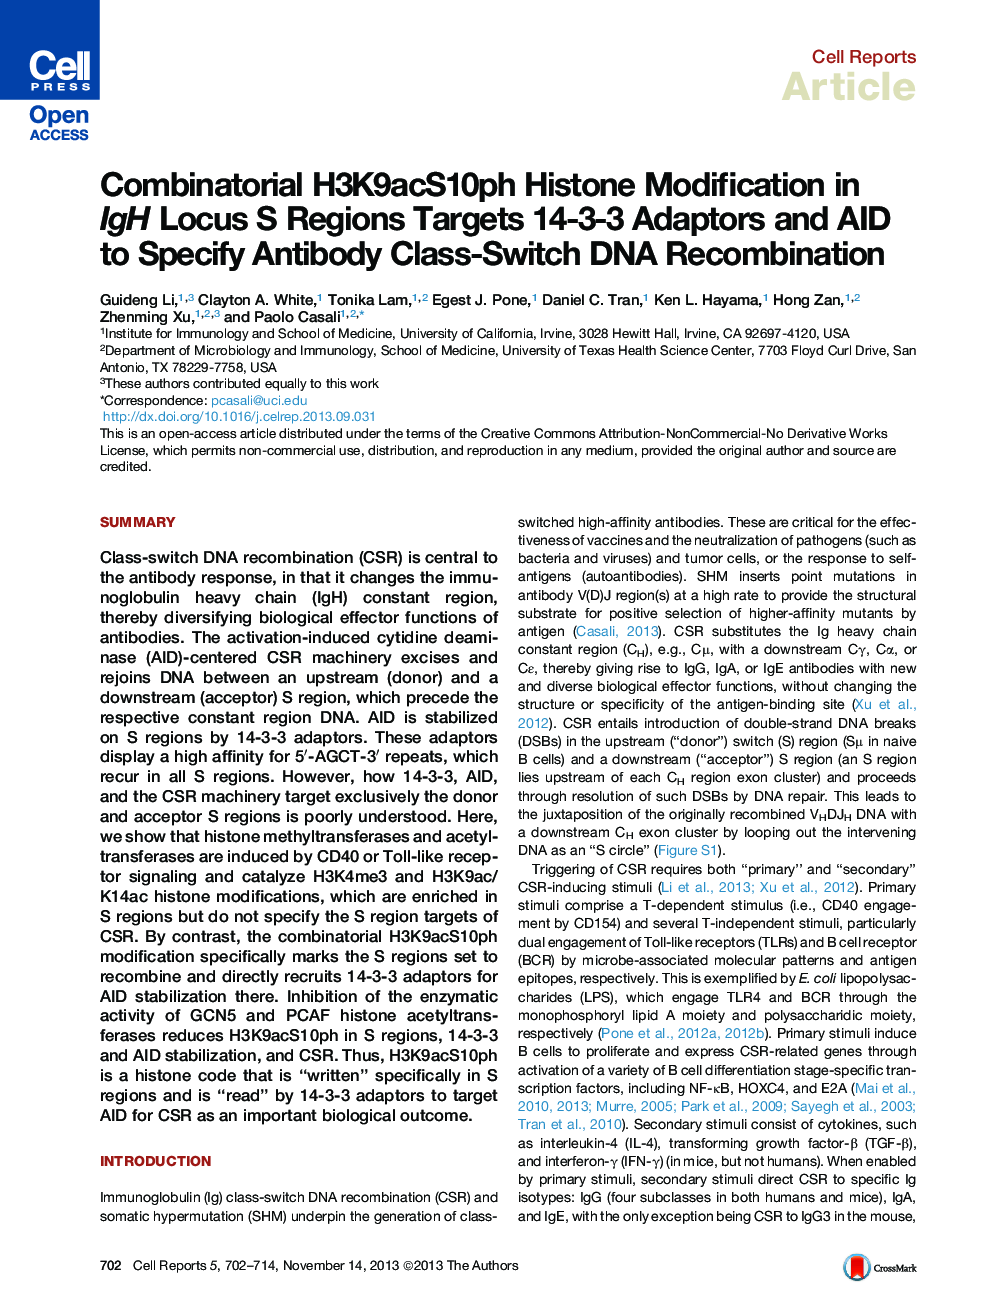 Combinatorial H3K9acS10ph Histone Modification in IgH Locus S Regions Targets 14-3-3 Adaptors and AID to Specify Antibody Class-Switch DNA Recombination 